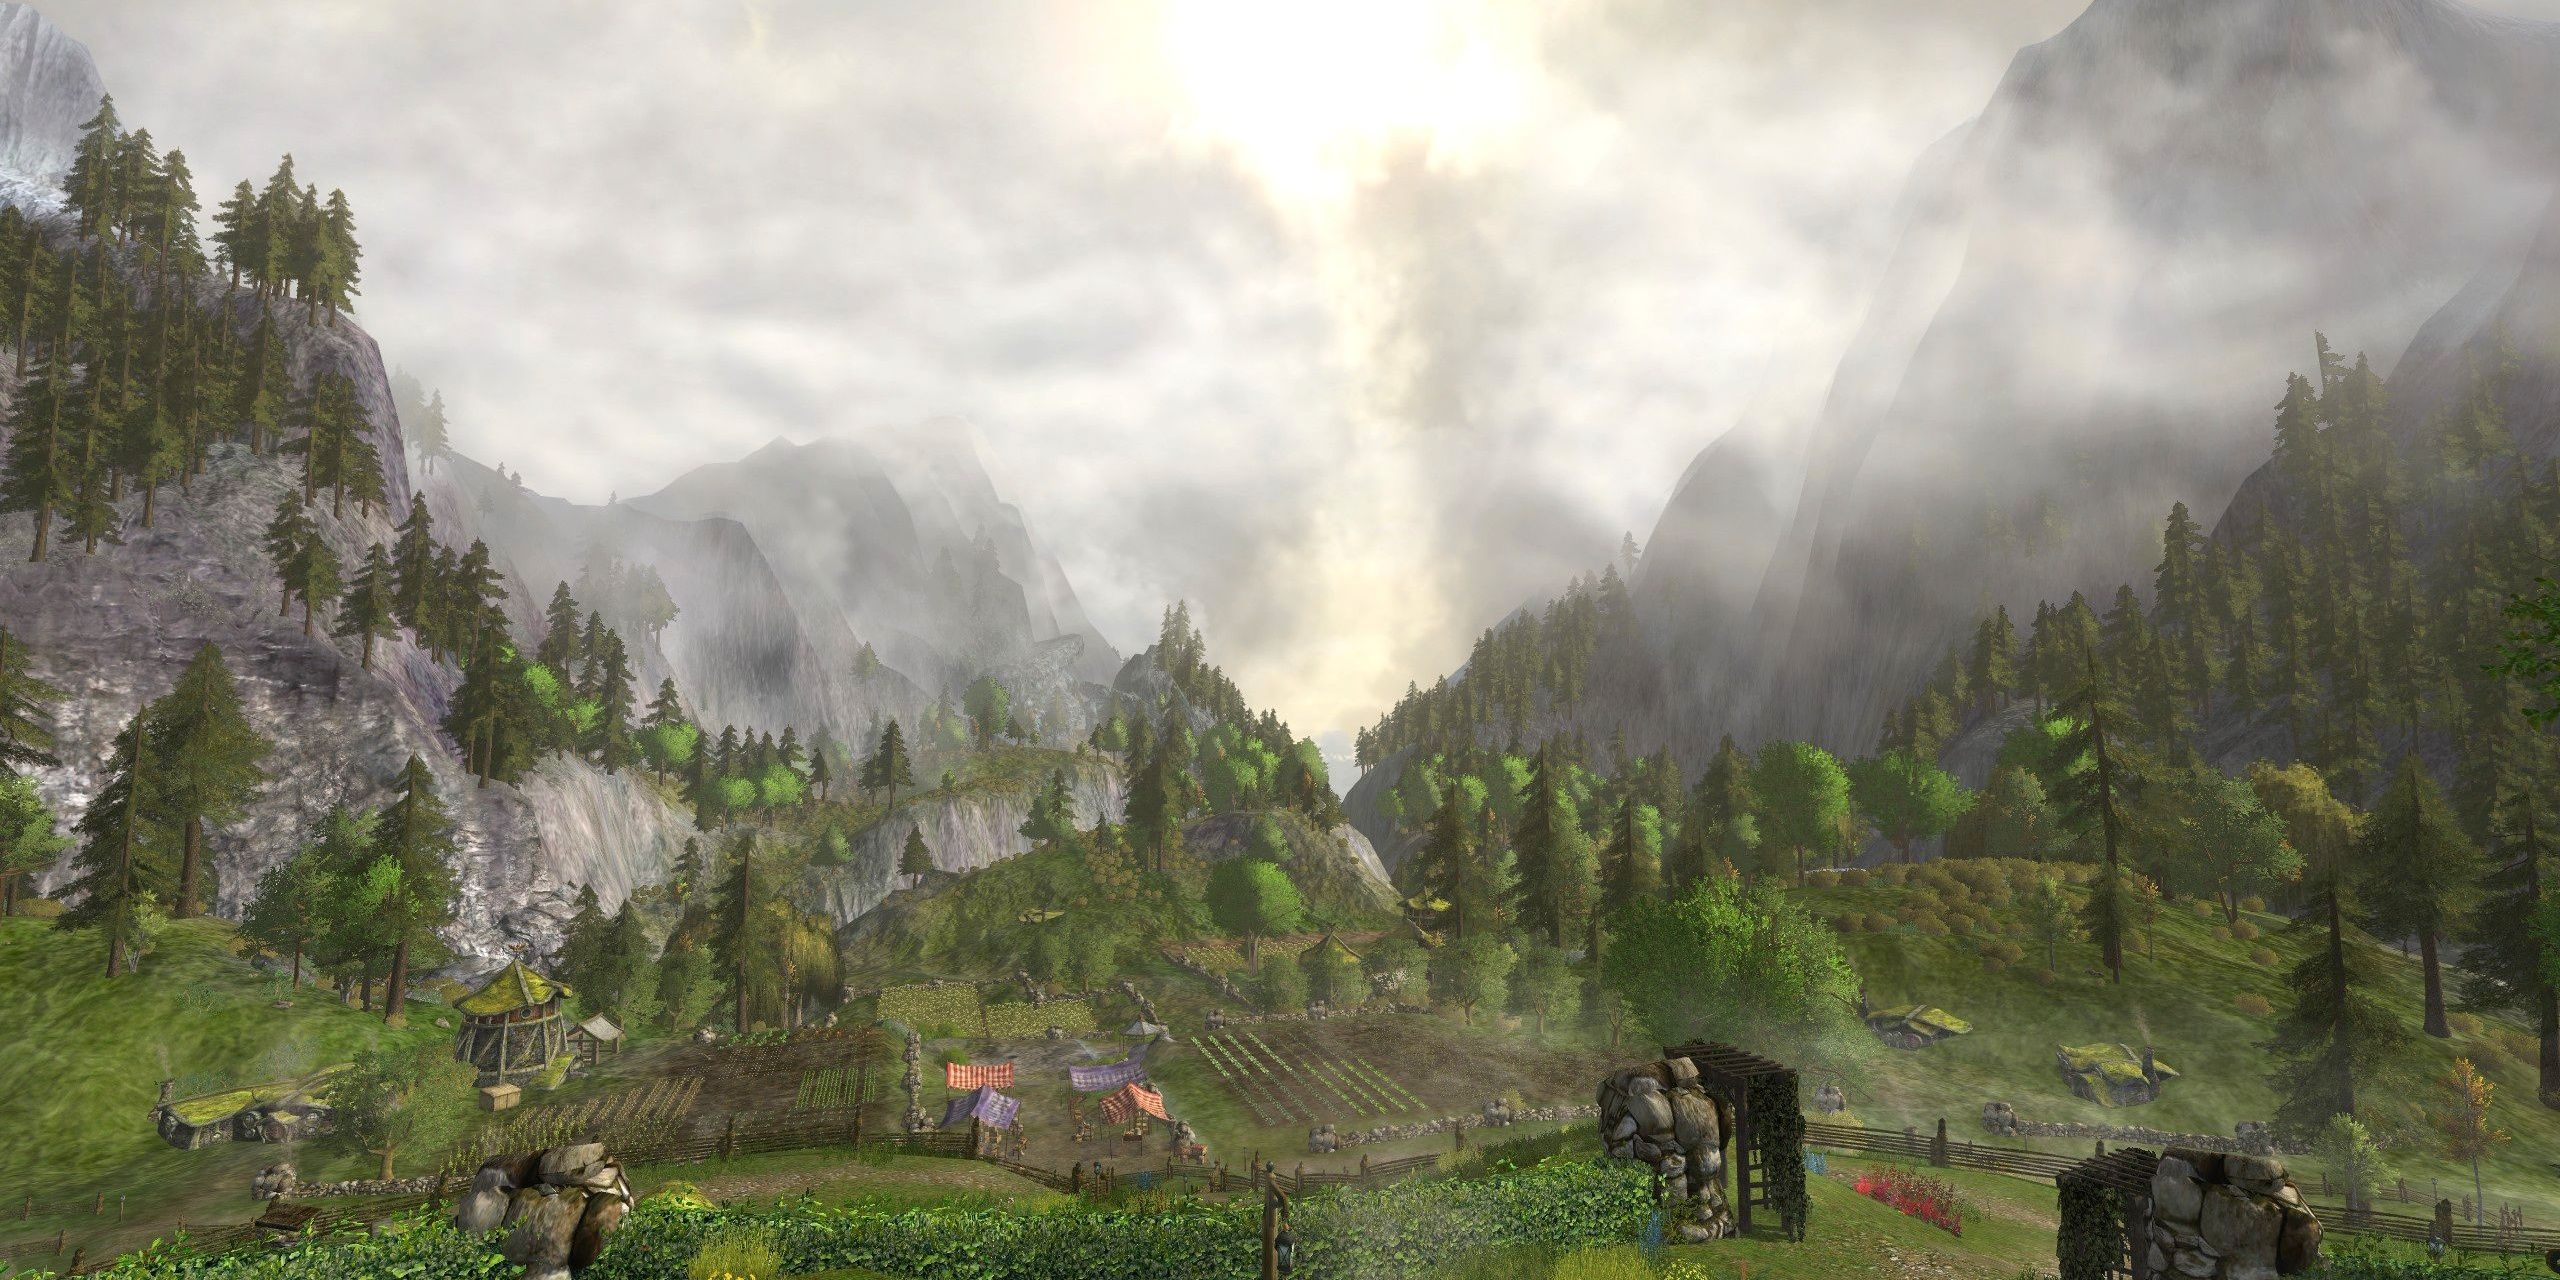 The Shire in Lord of the Rings Online; the sun breaks through the clouds.